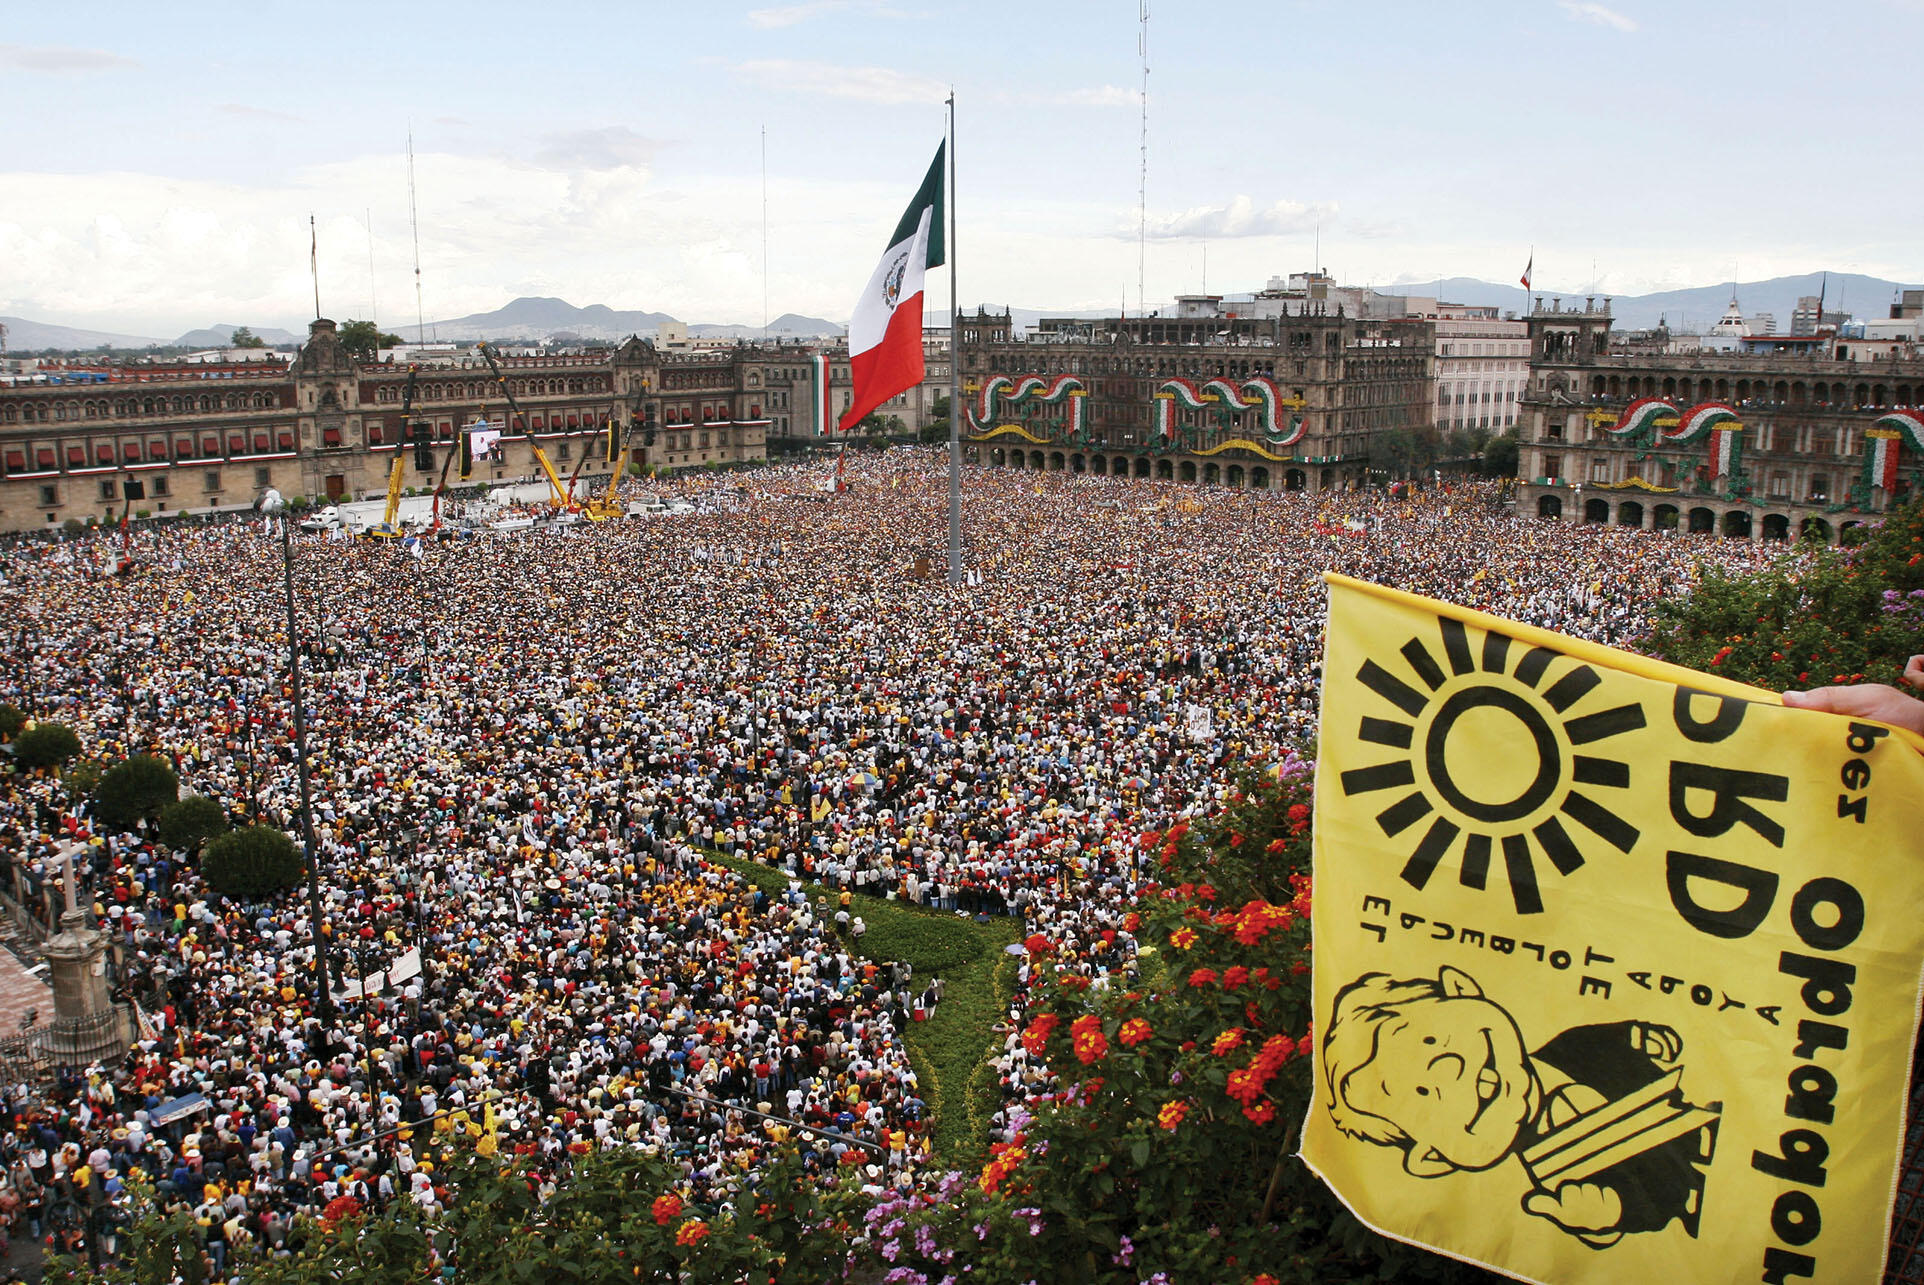 A huge crowd gathered in Mexico City's main plaza, the Zocalo, to support Andrés Manuel López Obrador’s resistance to the declared results of the 2006 election. (Photo by Marco Ugarte/Associated Press.)